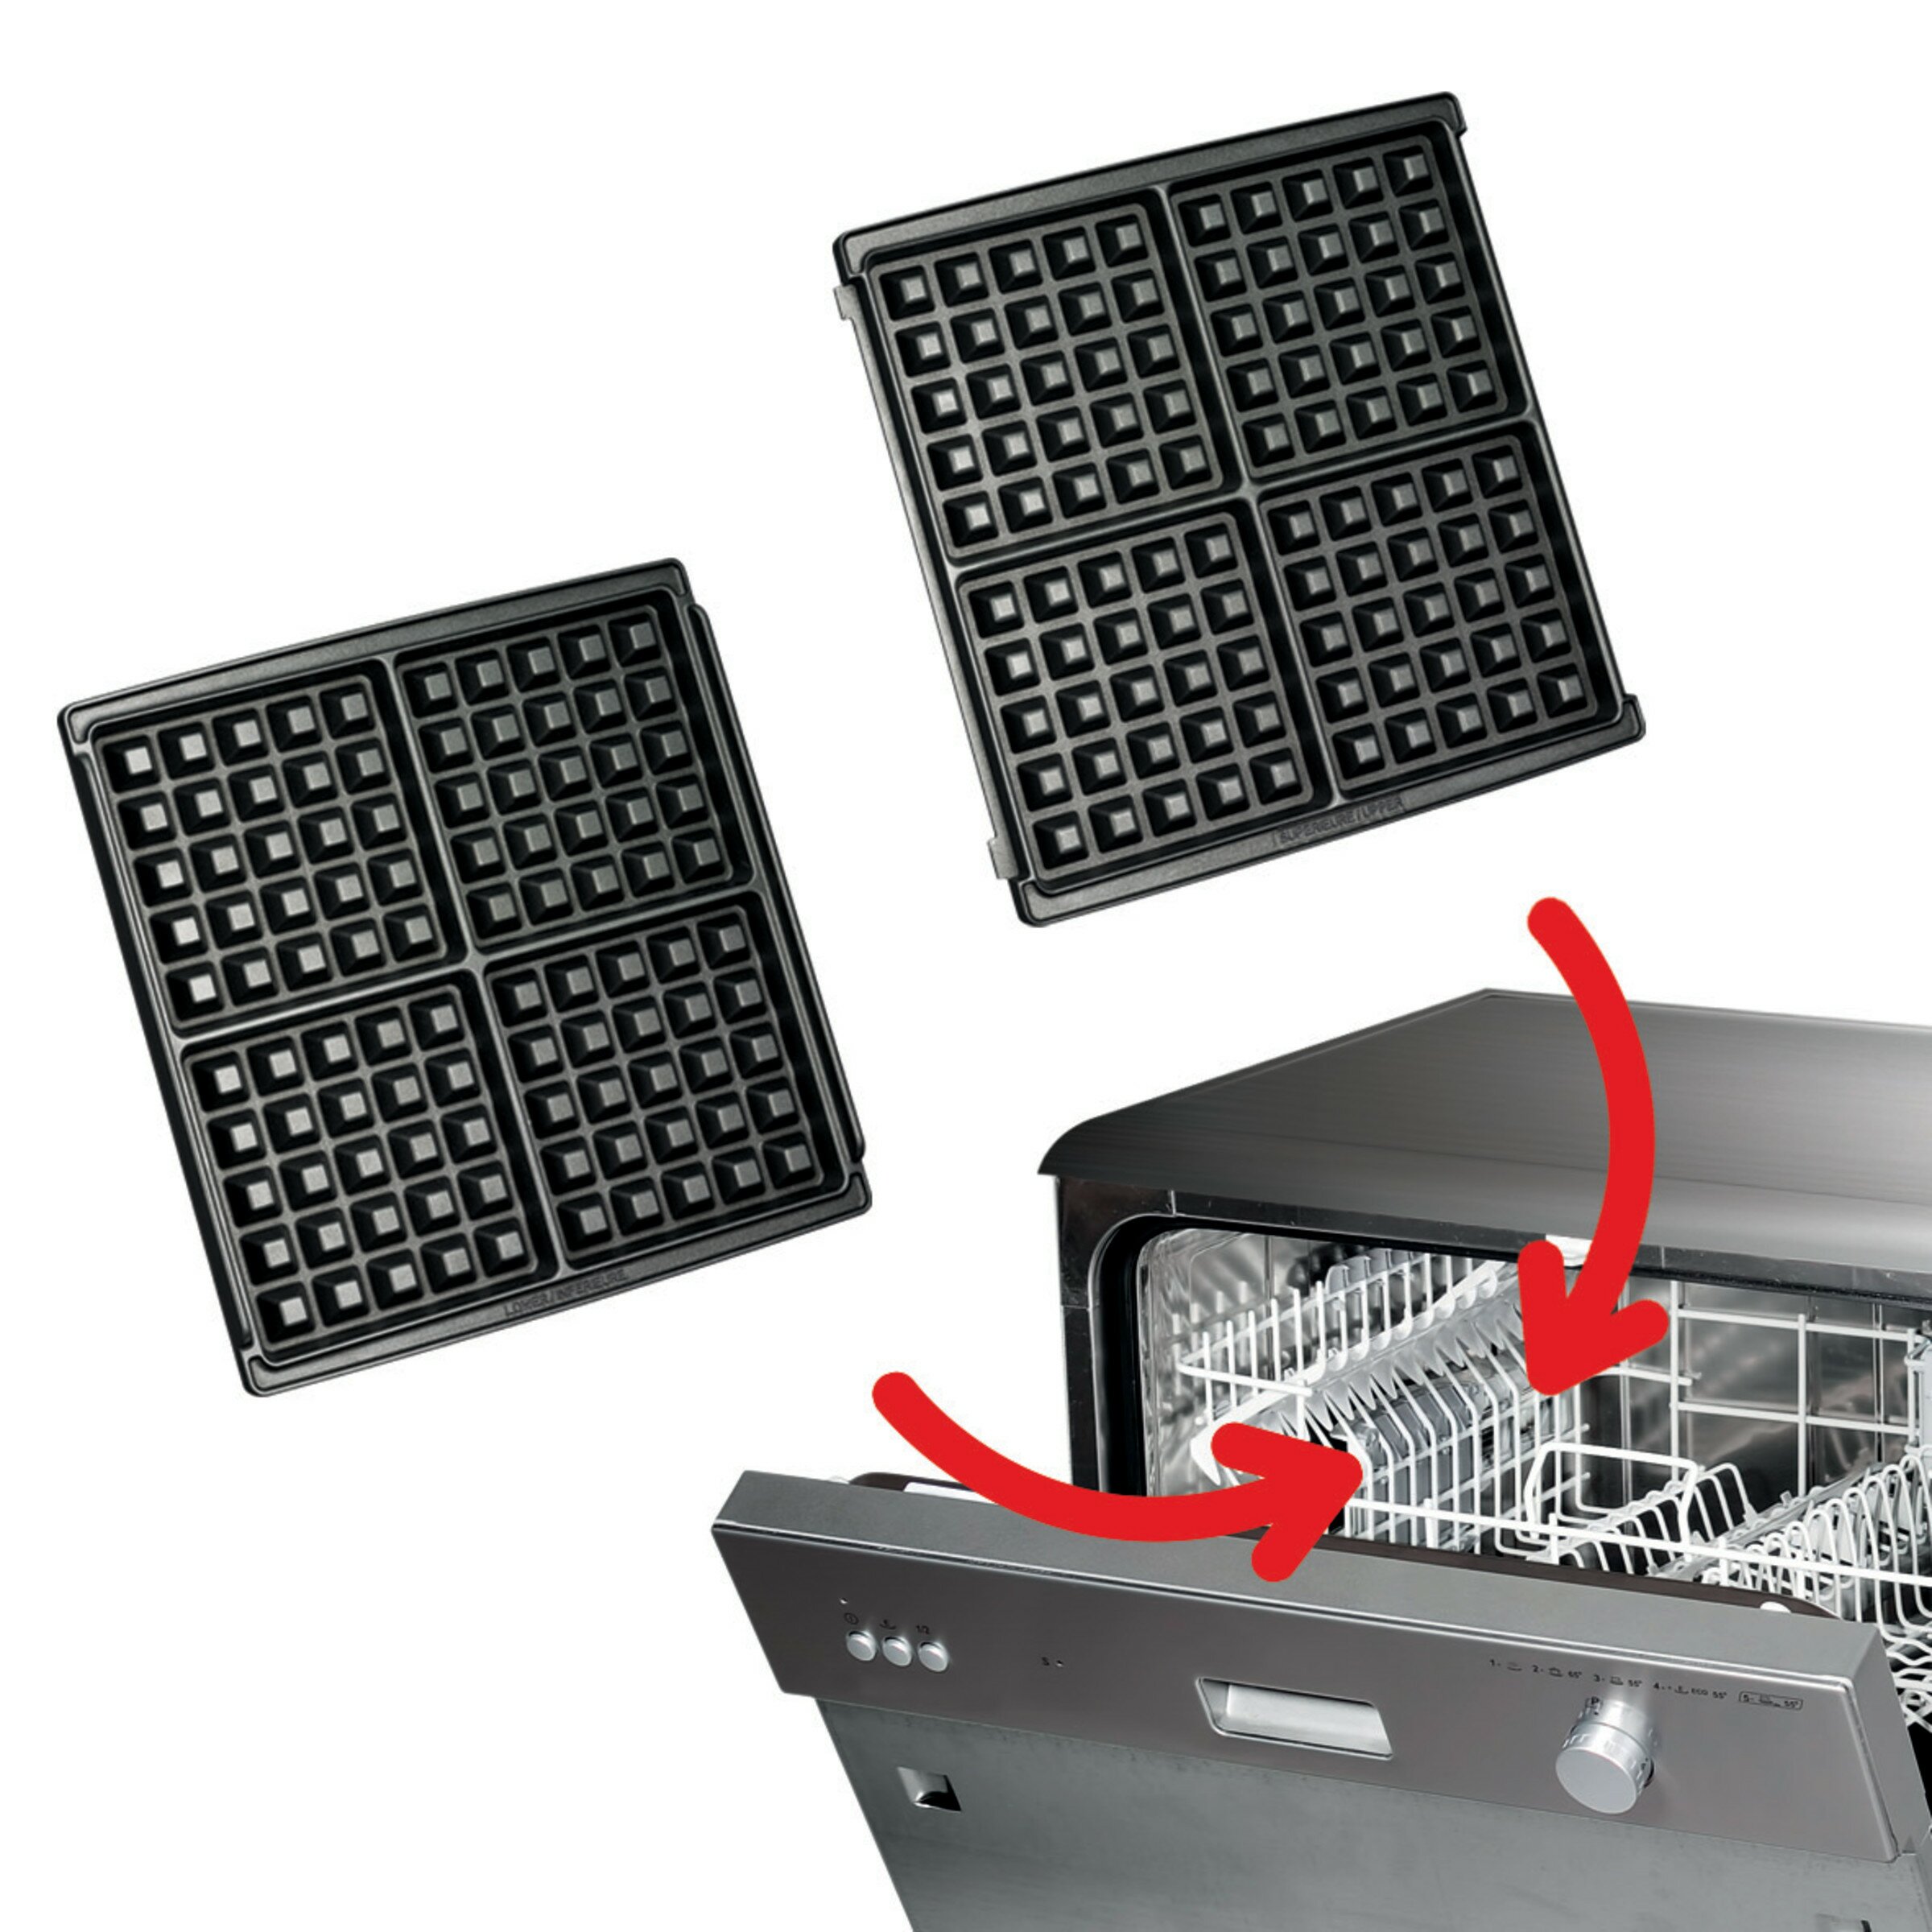 How do you change the plates in an Oster waffle maker?